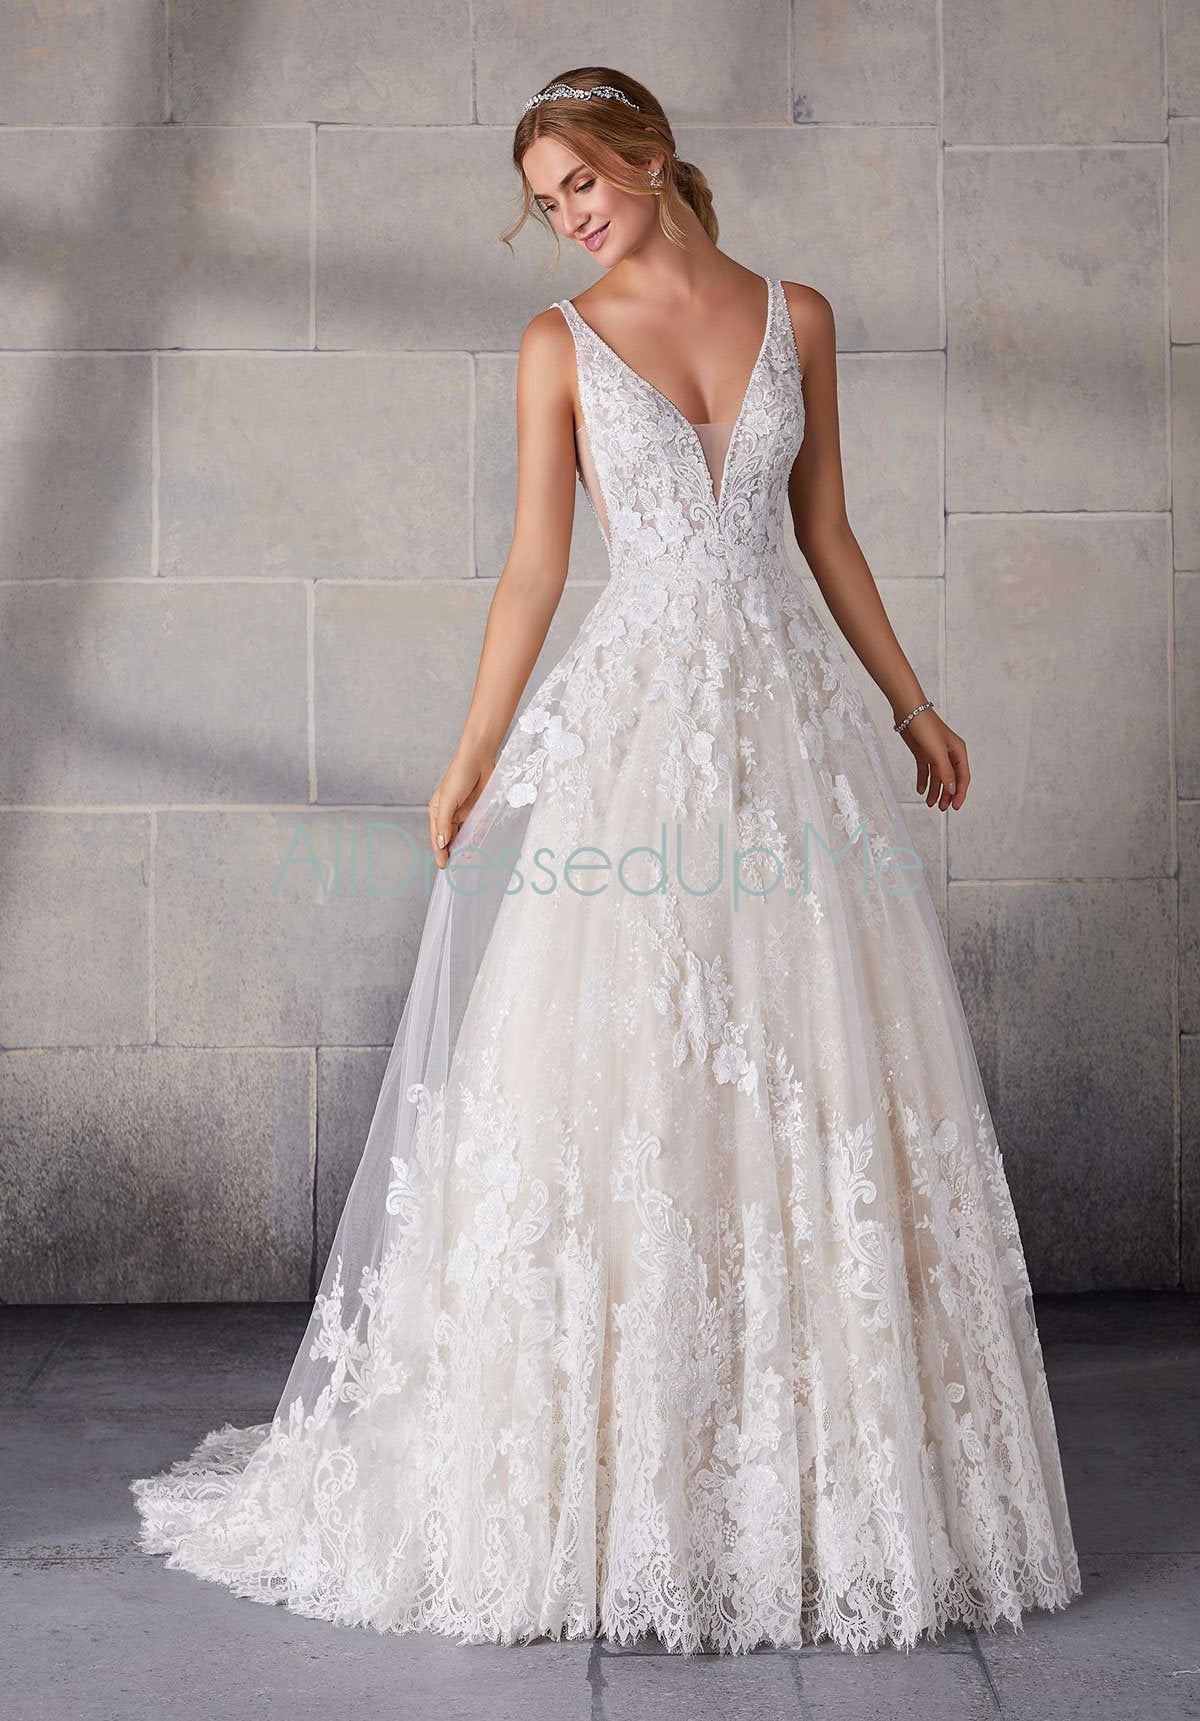 Morilee - Suzanne - 2142 - Cheron's Bridal, Wedding Gown - Morilee Line - - Wedding Gowns Dresses Chattanooga Hixson Shops Boutiques Tennessee TN Georgia GA MSRP Lowest Prices Sale Discount